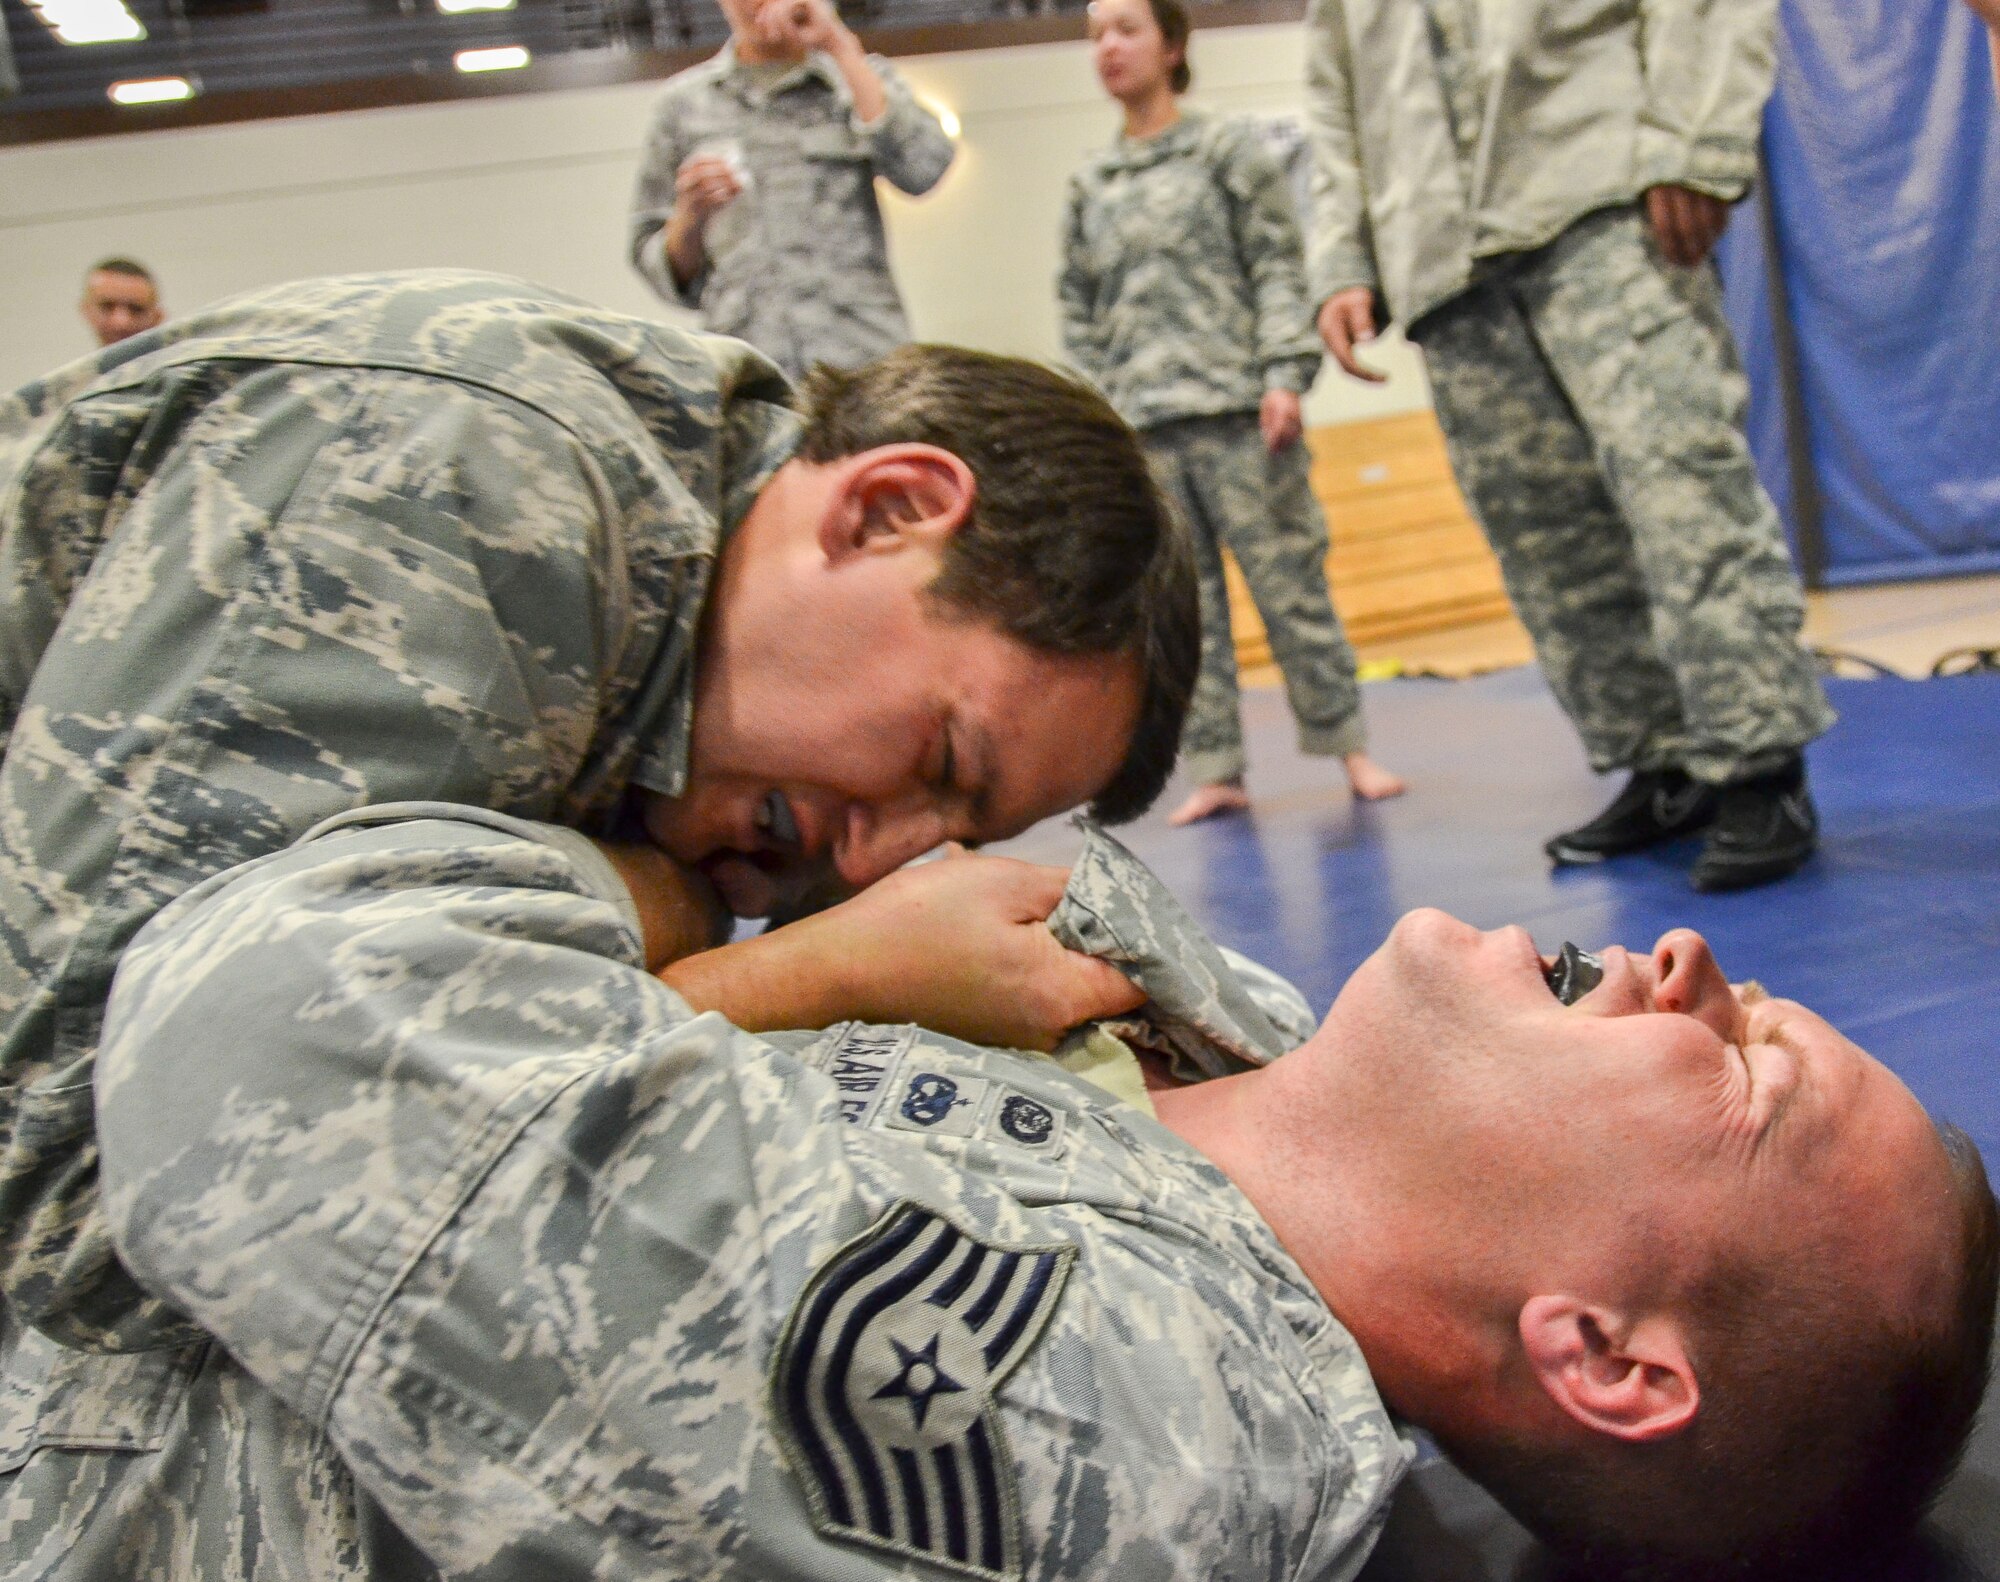 Capt. Brian Dicks, 55th Rescue Squadron, attempts to gain a dominant position on Tech Sgt. Joshua Holliday, 612th Air and Space Operations Center, during the Modern Army Combatives Program (MACP) Basic Combatives Course Level 1 at Davis-Monthan Air Force Base, Ariz., Jan. 16, 2014. The 40-hour course focuses on the three phases of basic fighting strategy; close the distance, gain the dominate position, and how to finish the fight. (U.S. Air Force photo by Staff Sgt. Adam Grant/Released)